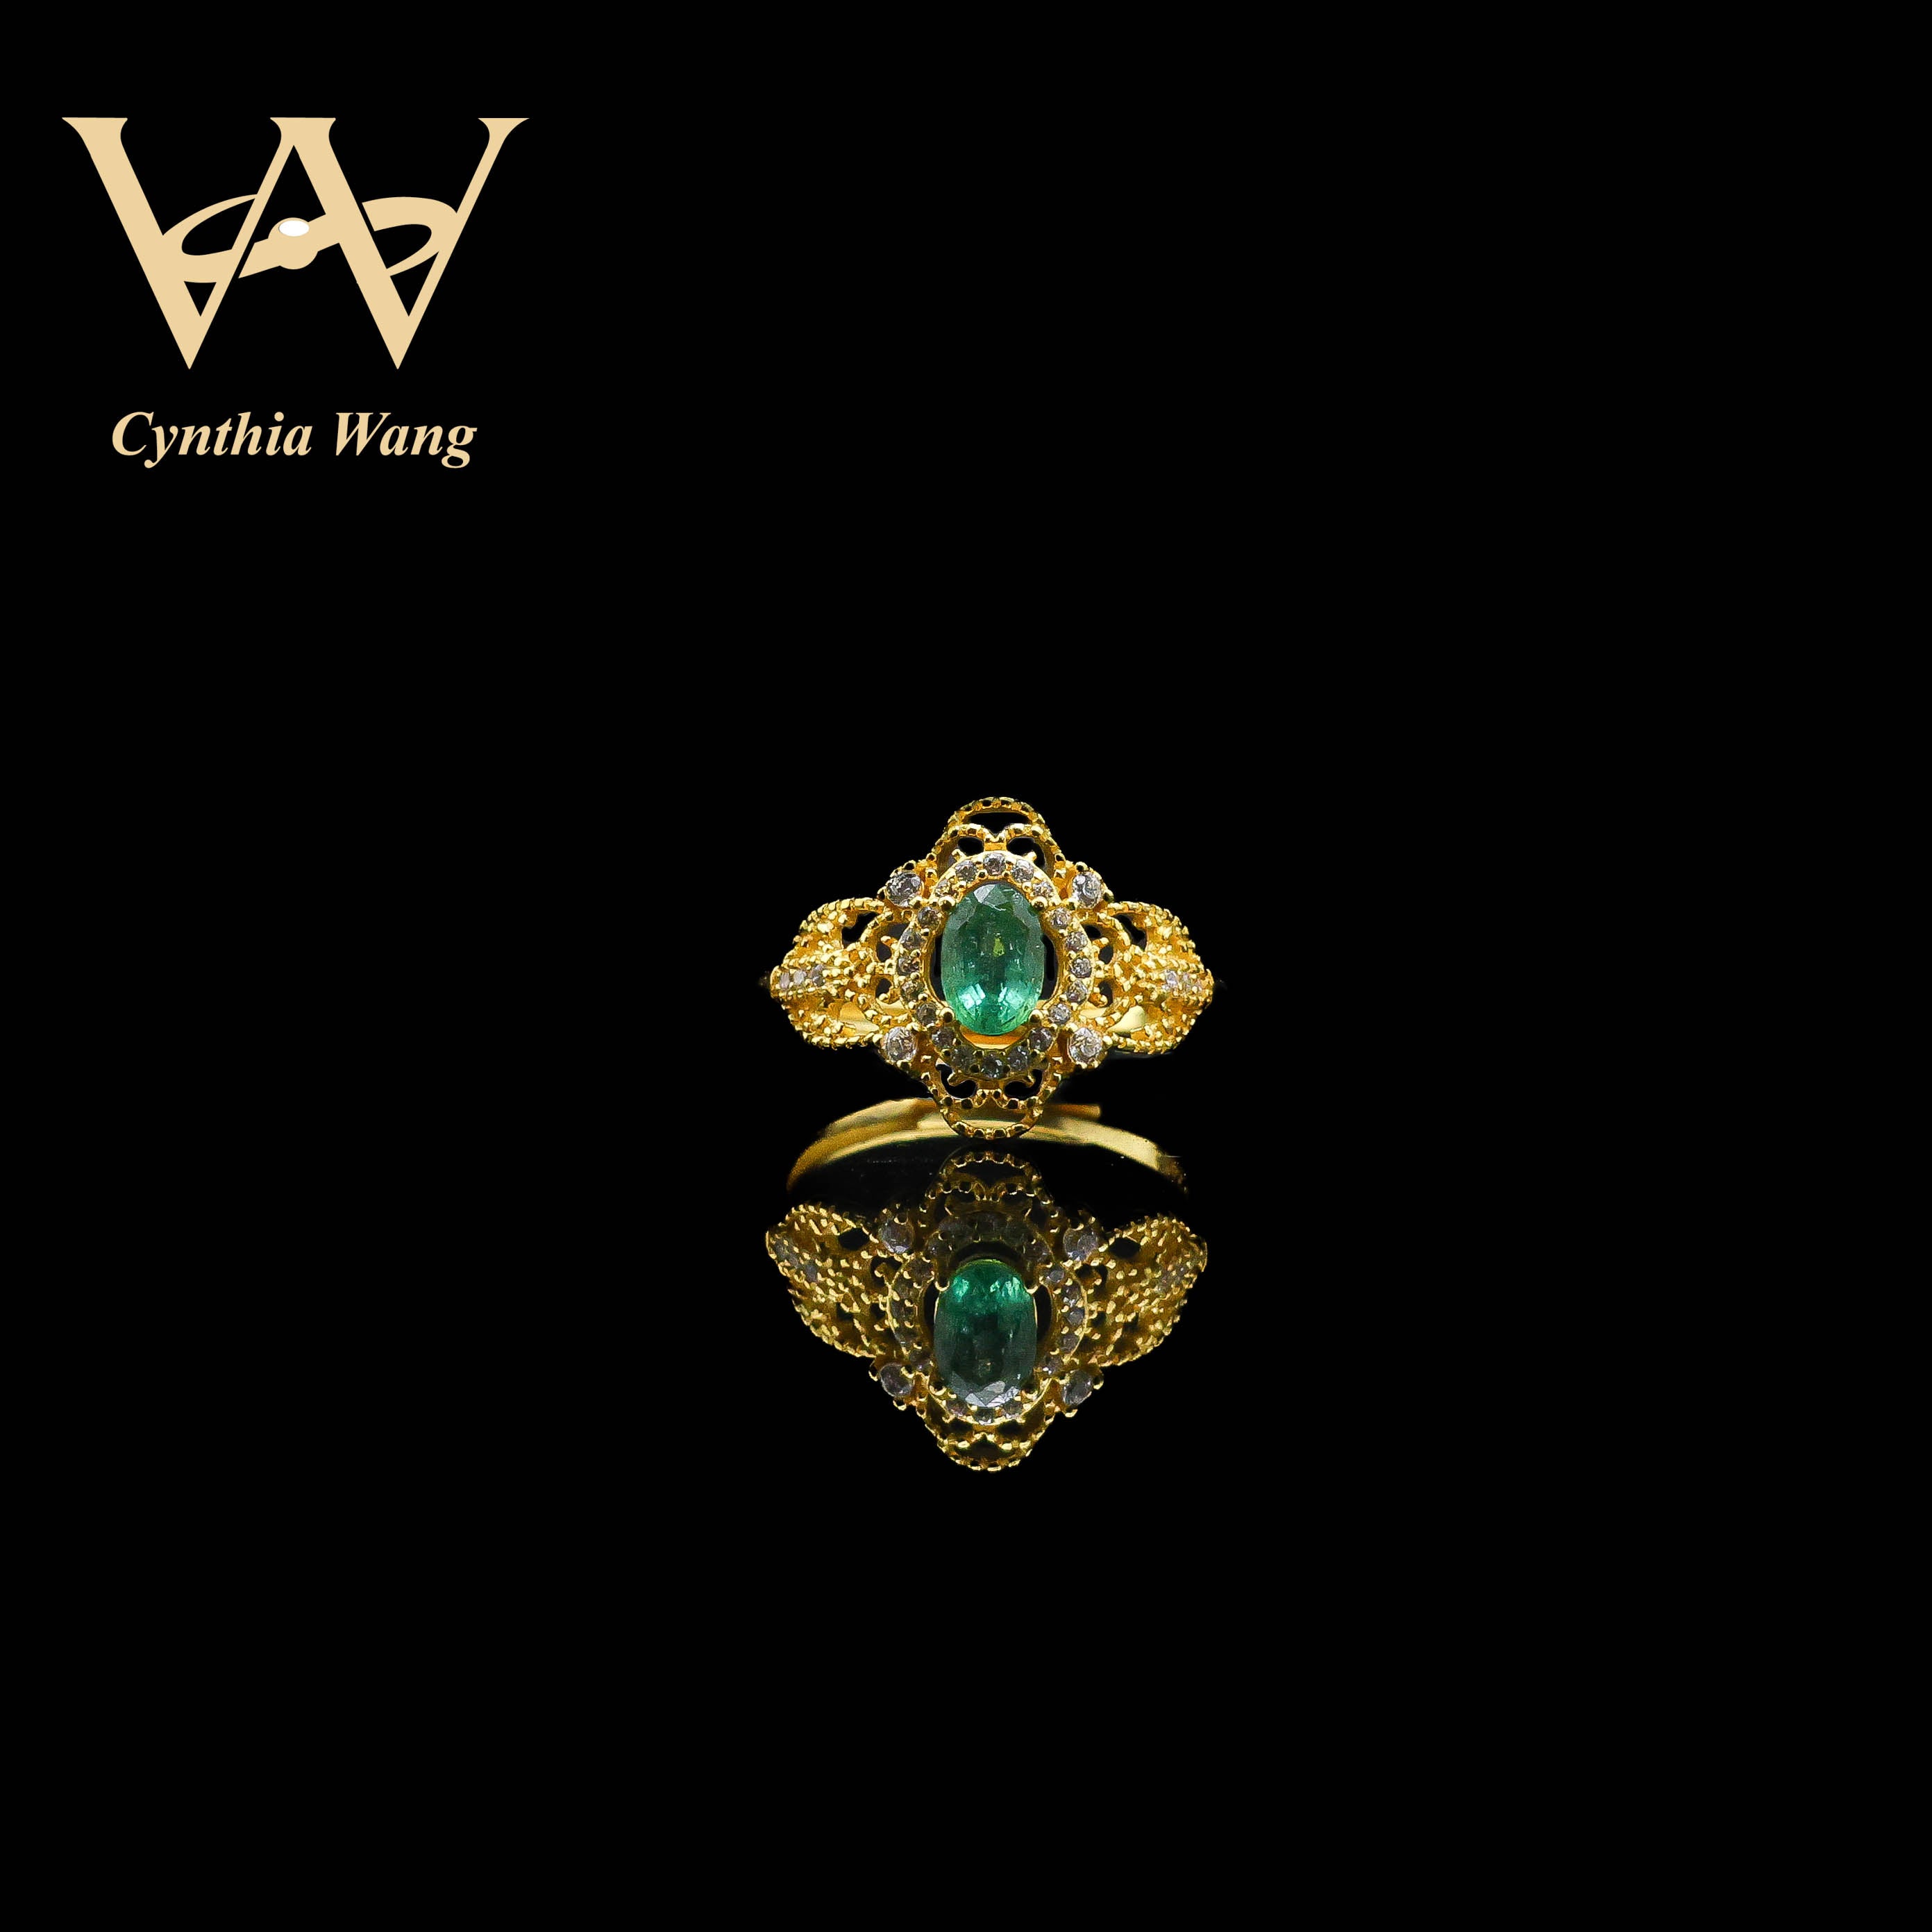 'Golden Aura of Nature' Emerald Ring with Lace Detailing